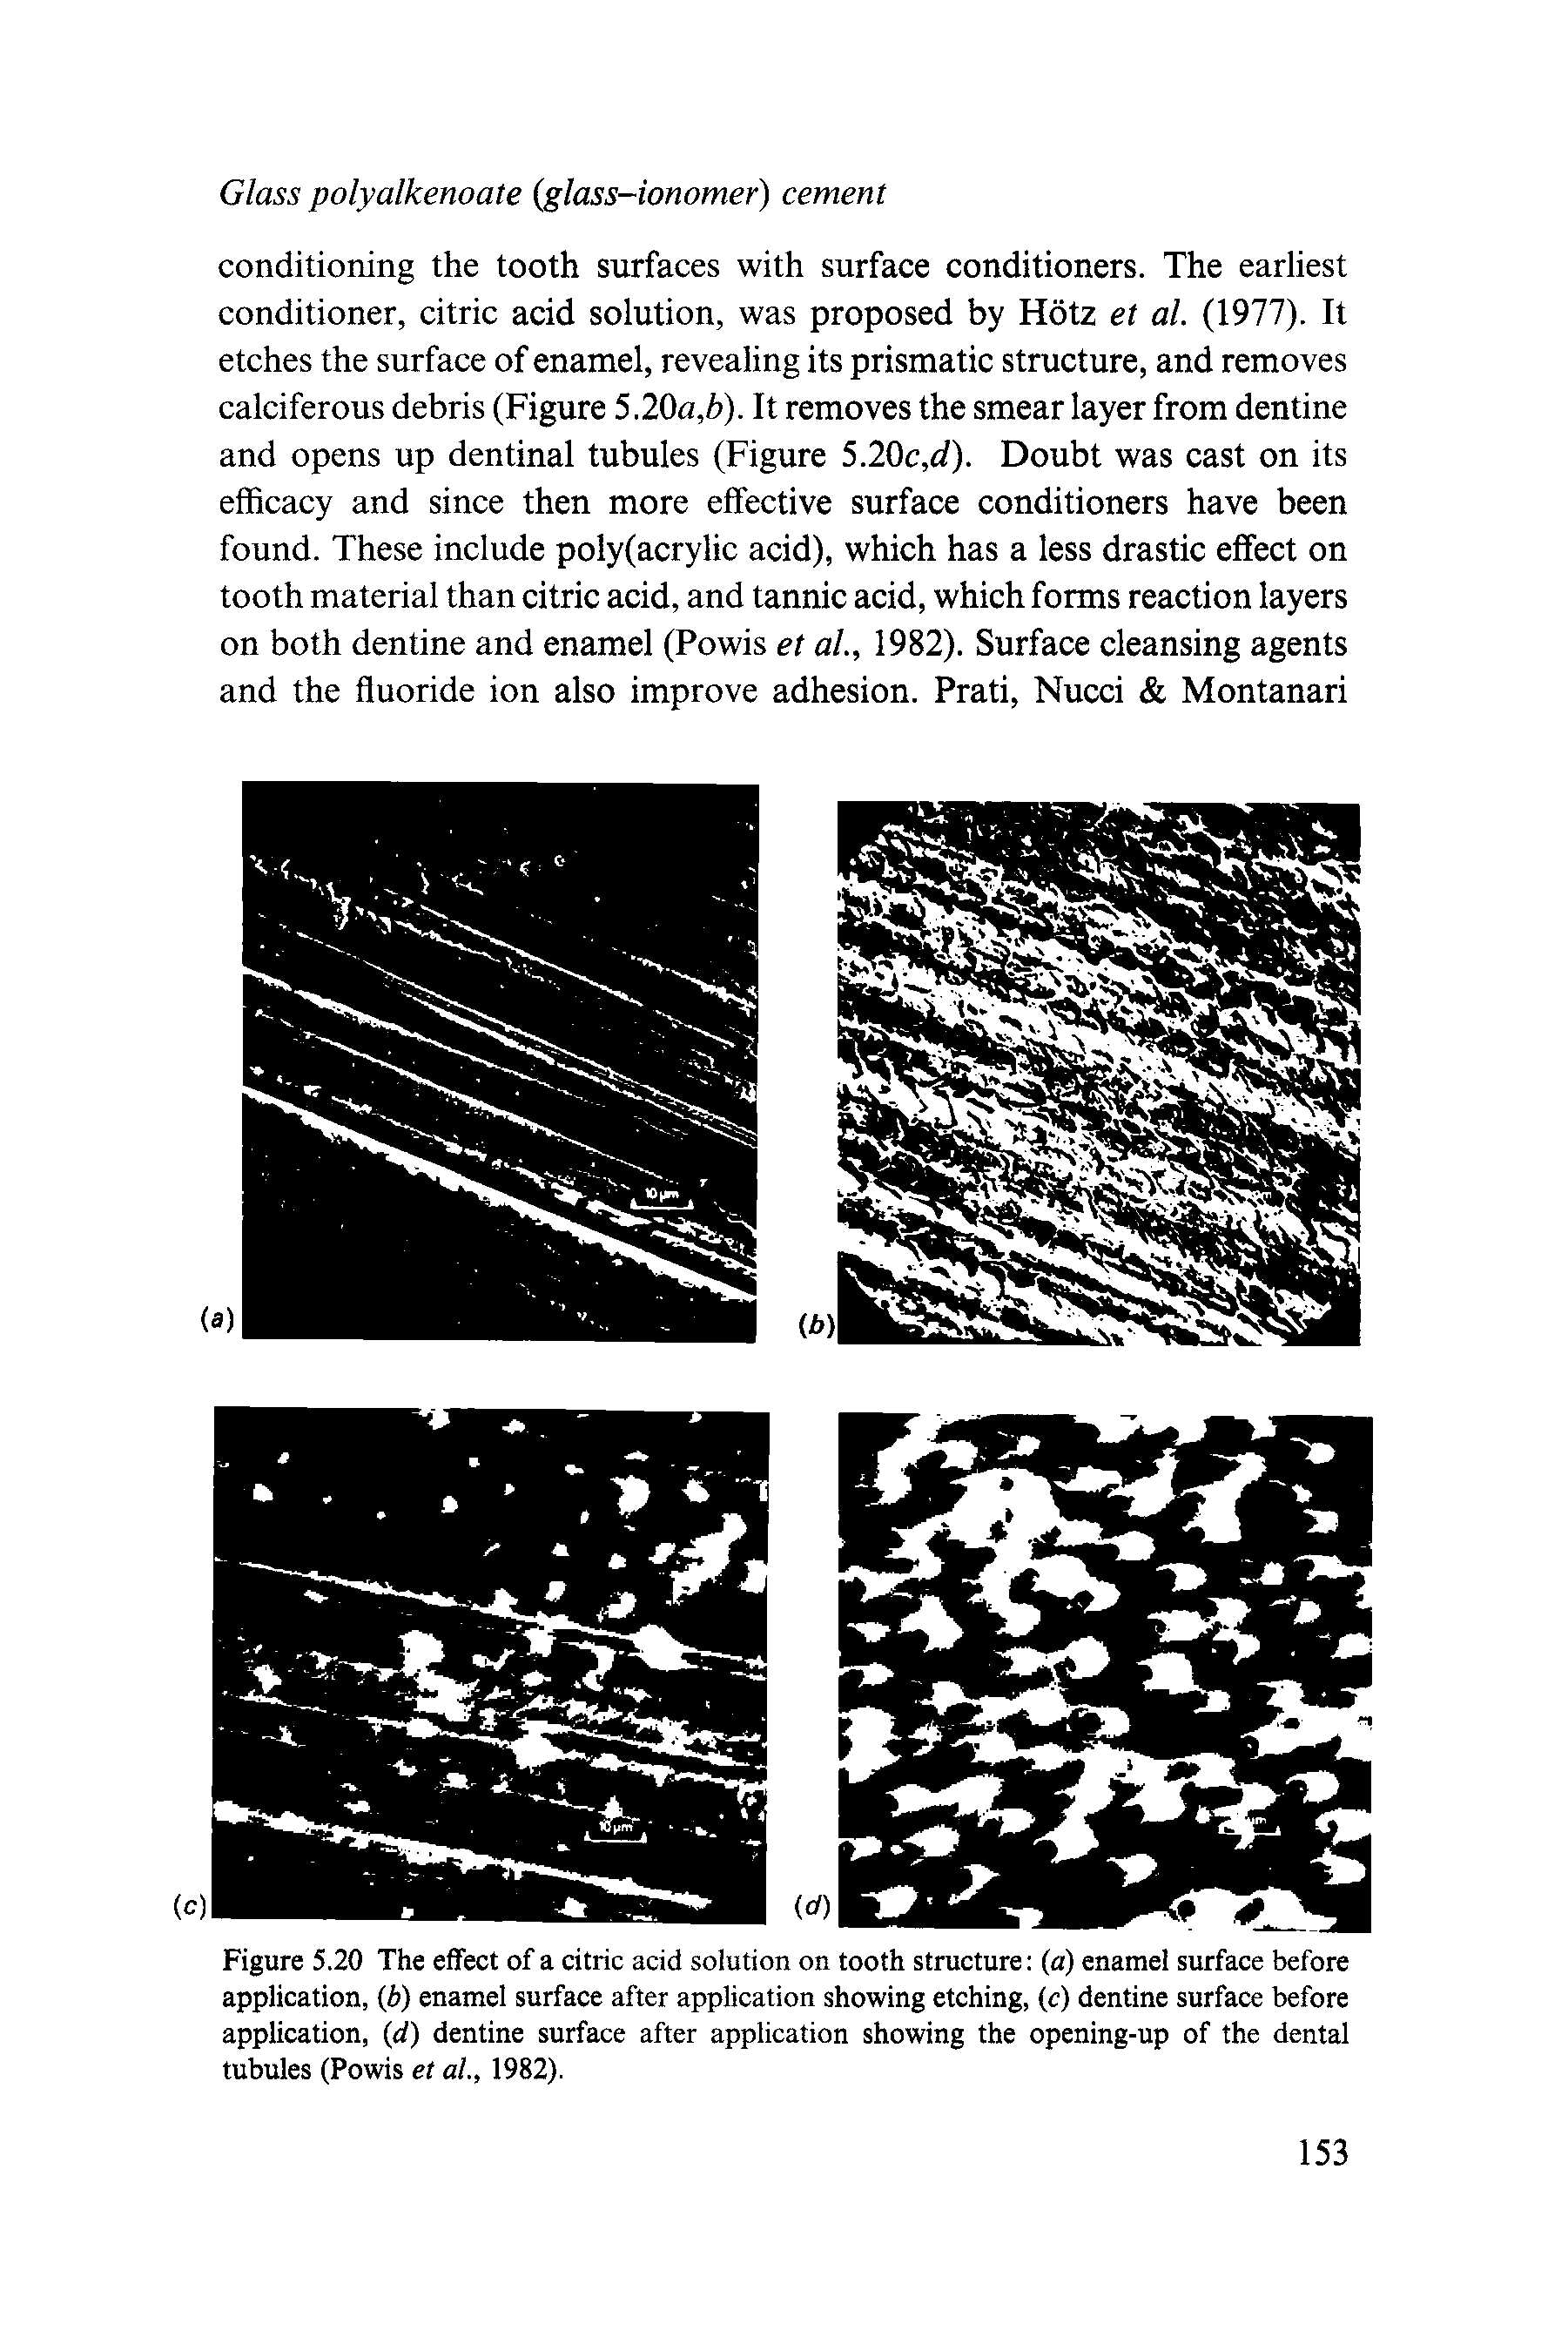 Figure 5.20 The effect of a citric acid solution on tooth structure (a) enamel surface before application, (b) enamel surface after application showing etching, (c) dentine surface before application, (d) dentine surface after application showing the opening-up of the dental tubules (Powis et al, 1982).